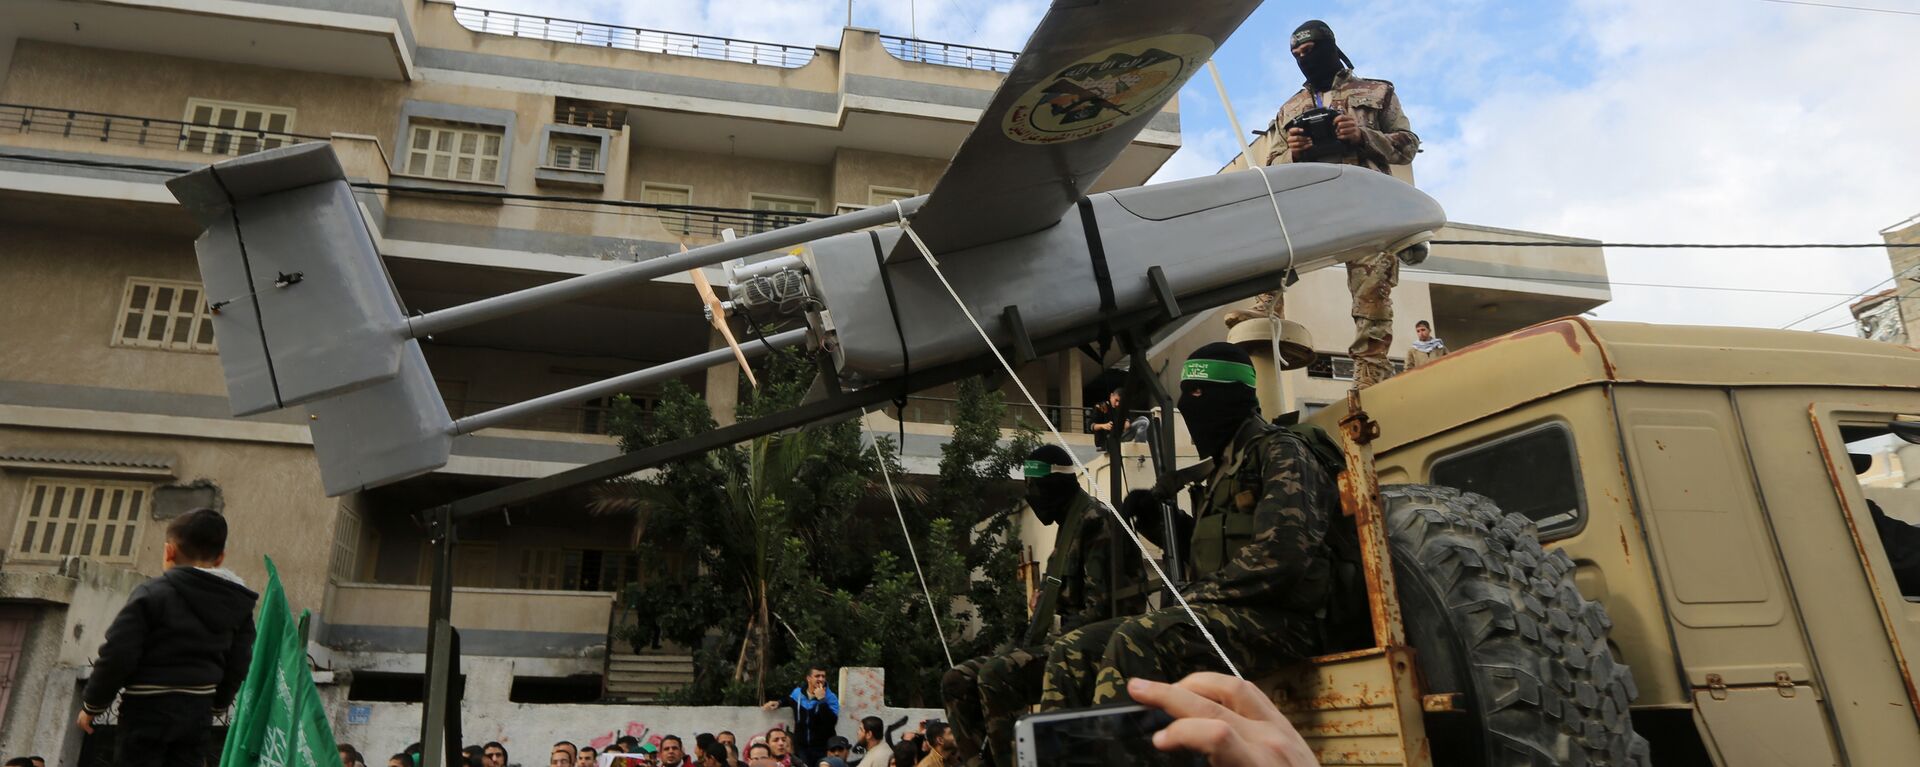 Palestinian militants of the Ezzedine al-Qassam Brigades, Hamas' armed wing, dislpay a drone during a parade marking the 27th anniversary of the Islamist movement’s creation on December 14, 2014 in Gaza City - Sputnik International, 1920, 24.10.2023